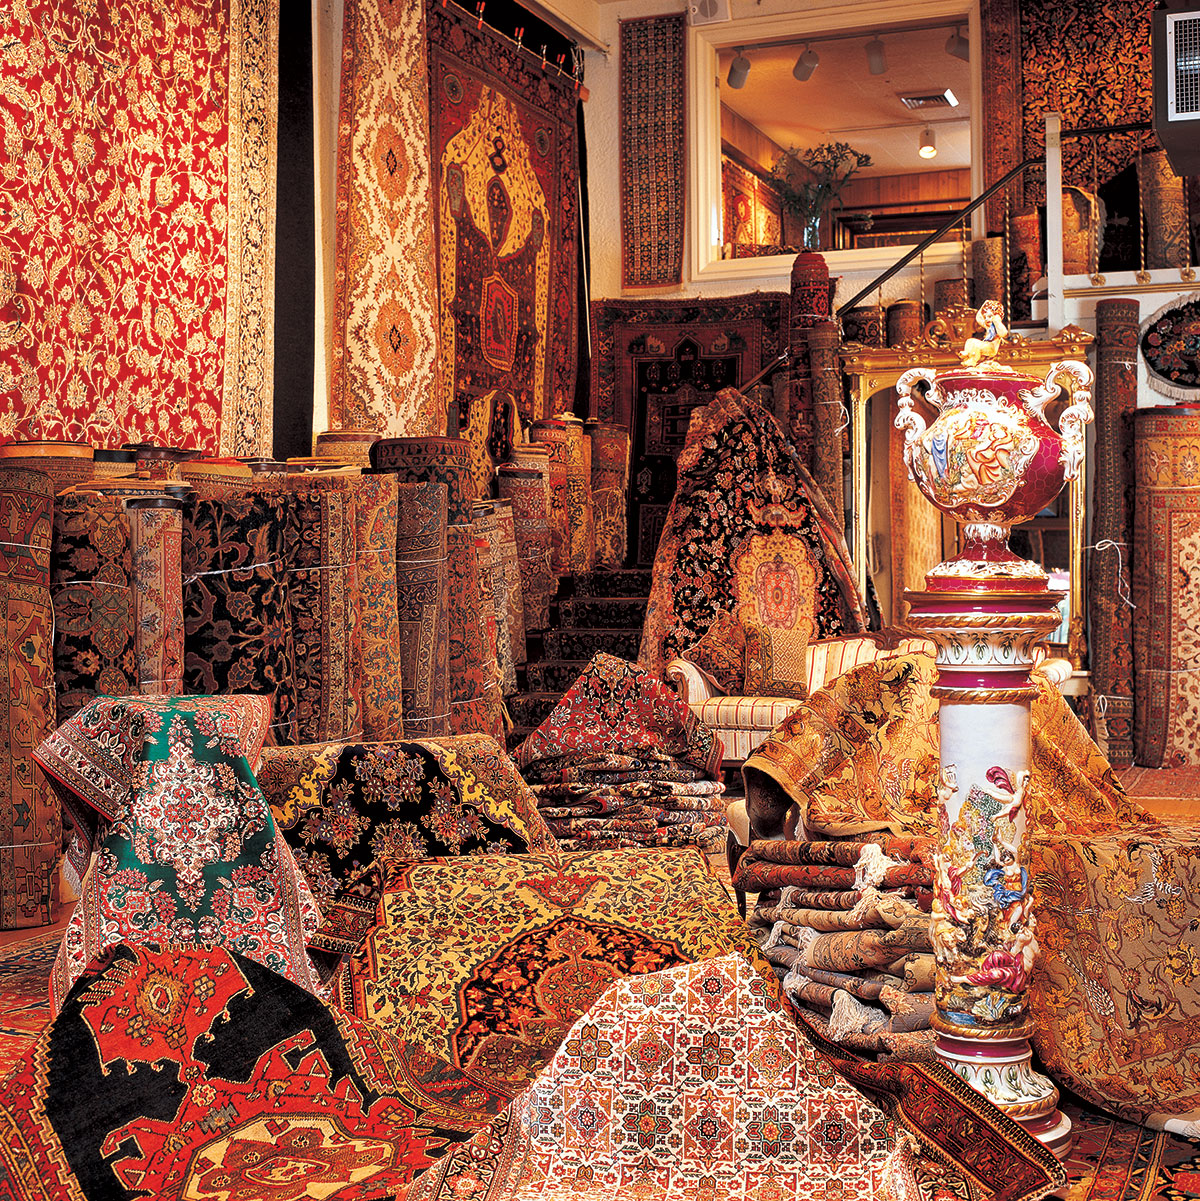 Medallion Rug Gallery Our Story, Medallion Rug Gallery Ownership